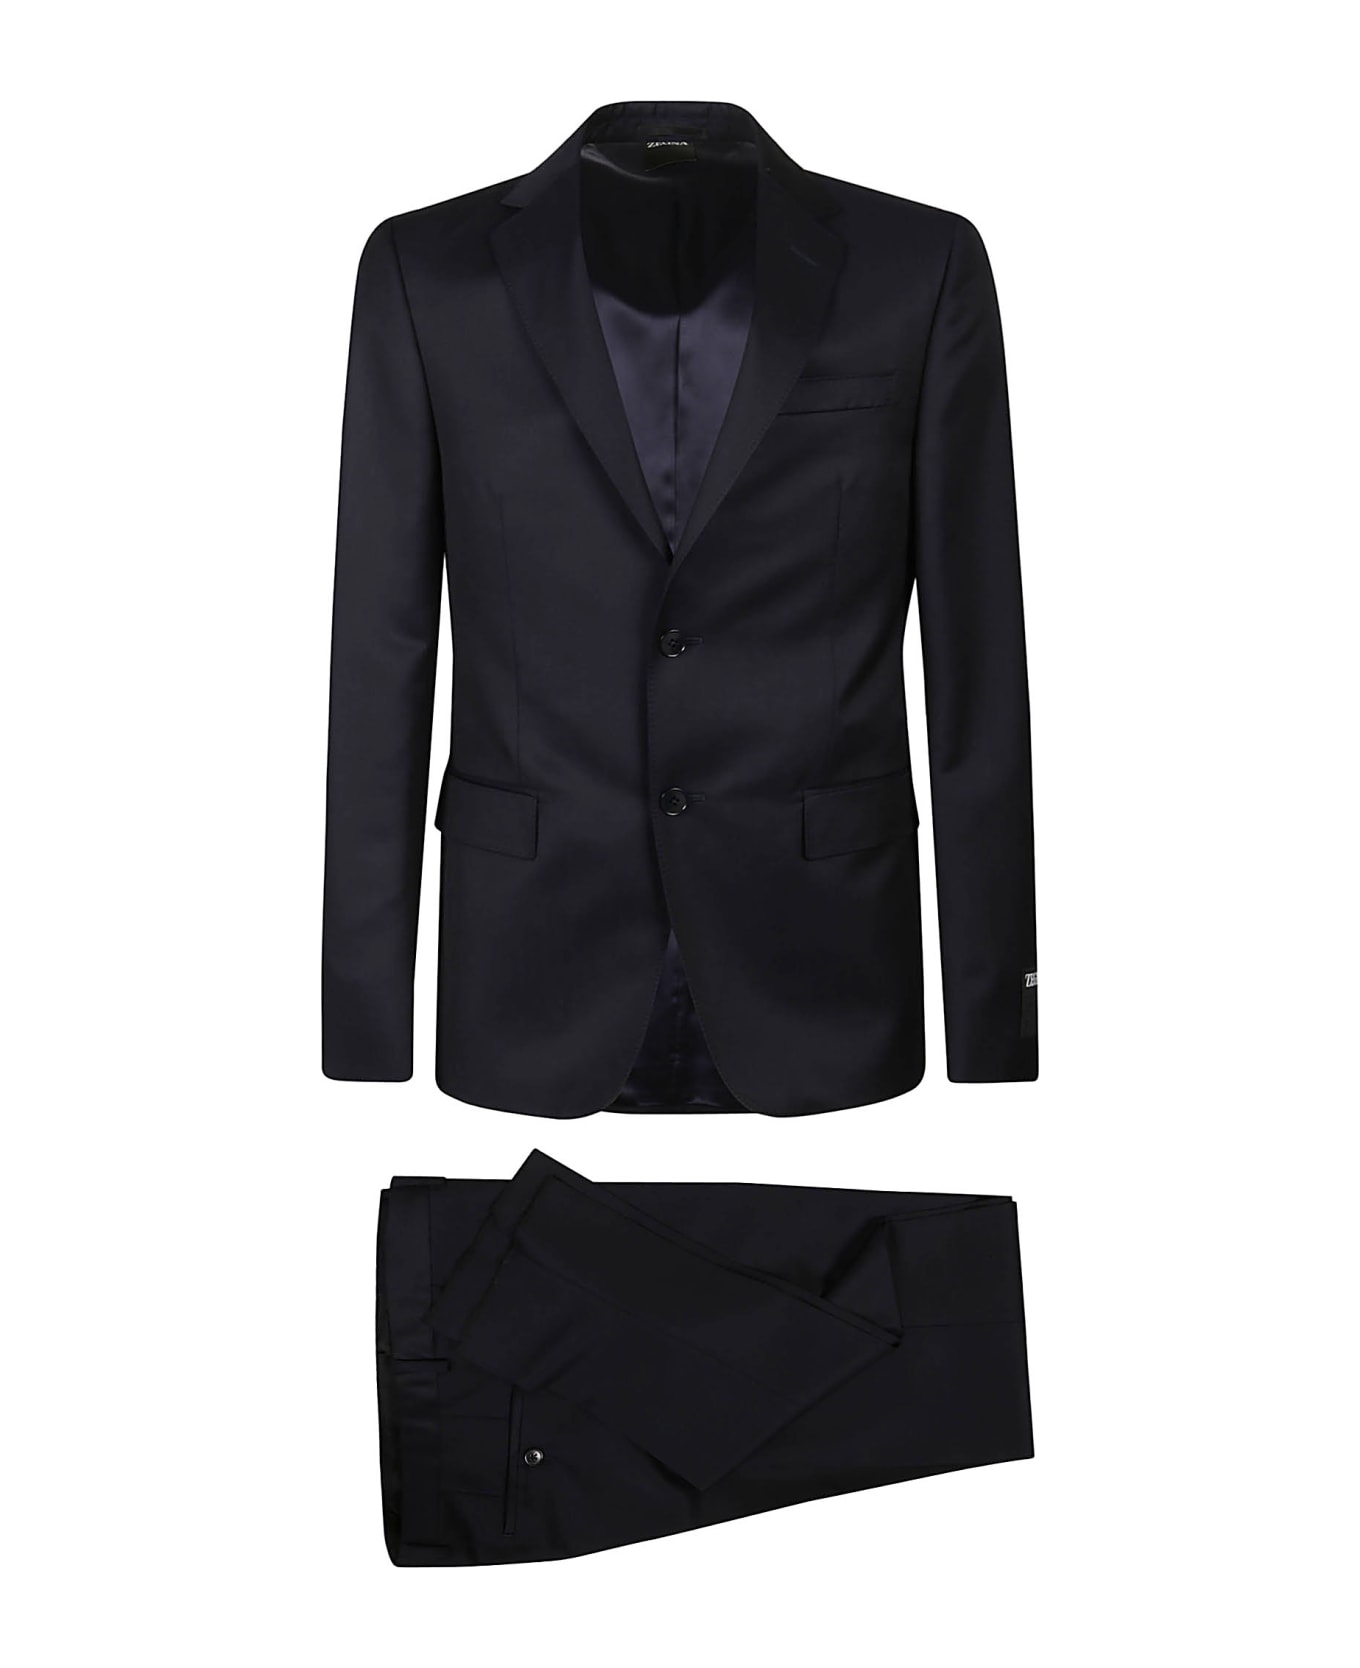 Zegna Lux Tailoring Suit - Navy スーツ